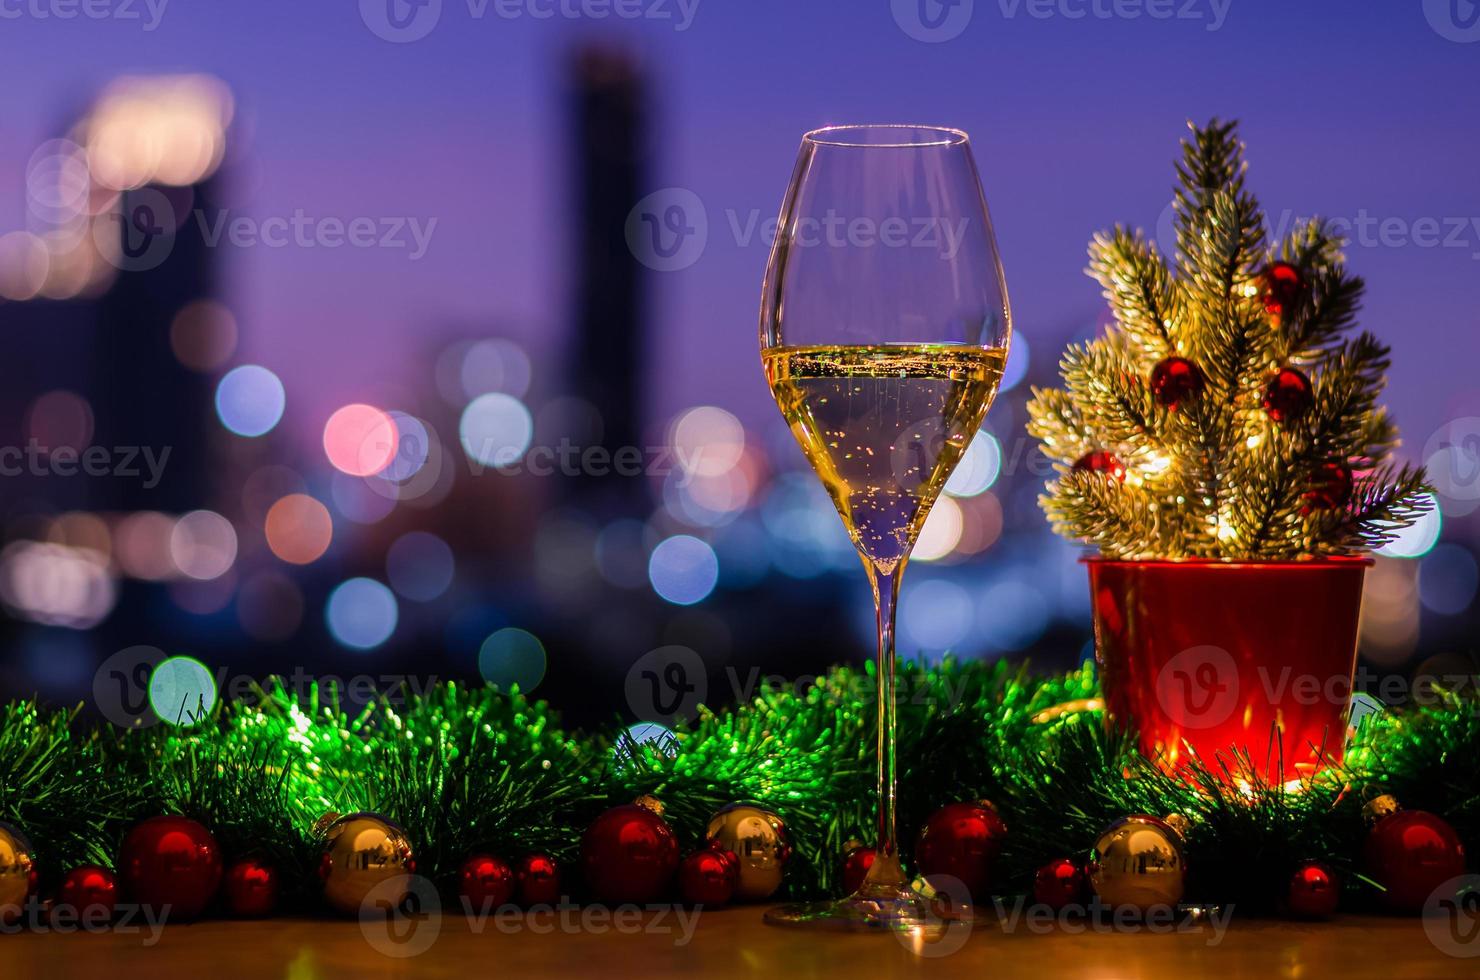 A glass of white wine puts on wooden table with Christmas tree decorated with bauble ornaments and lights on colorful city bokeh lights background. photo